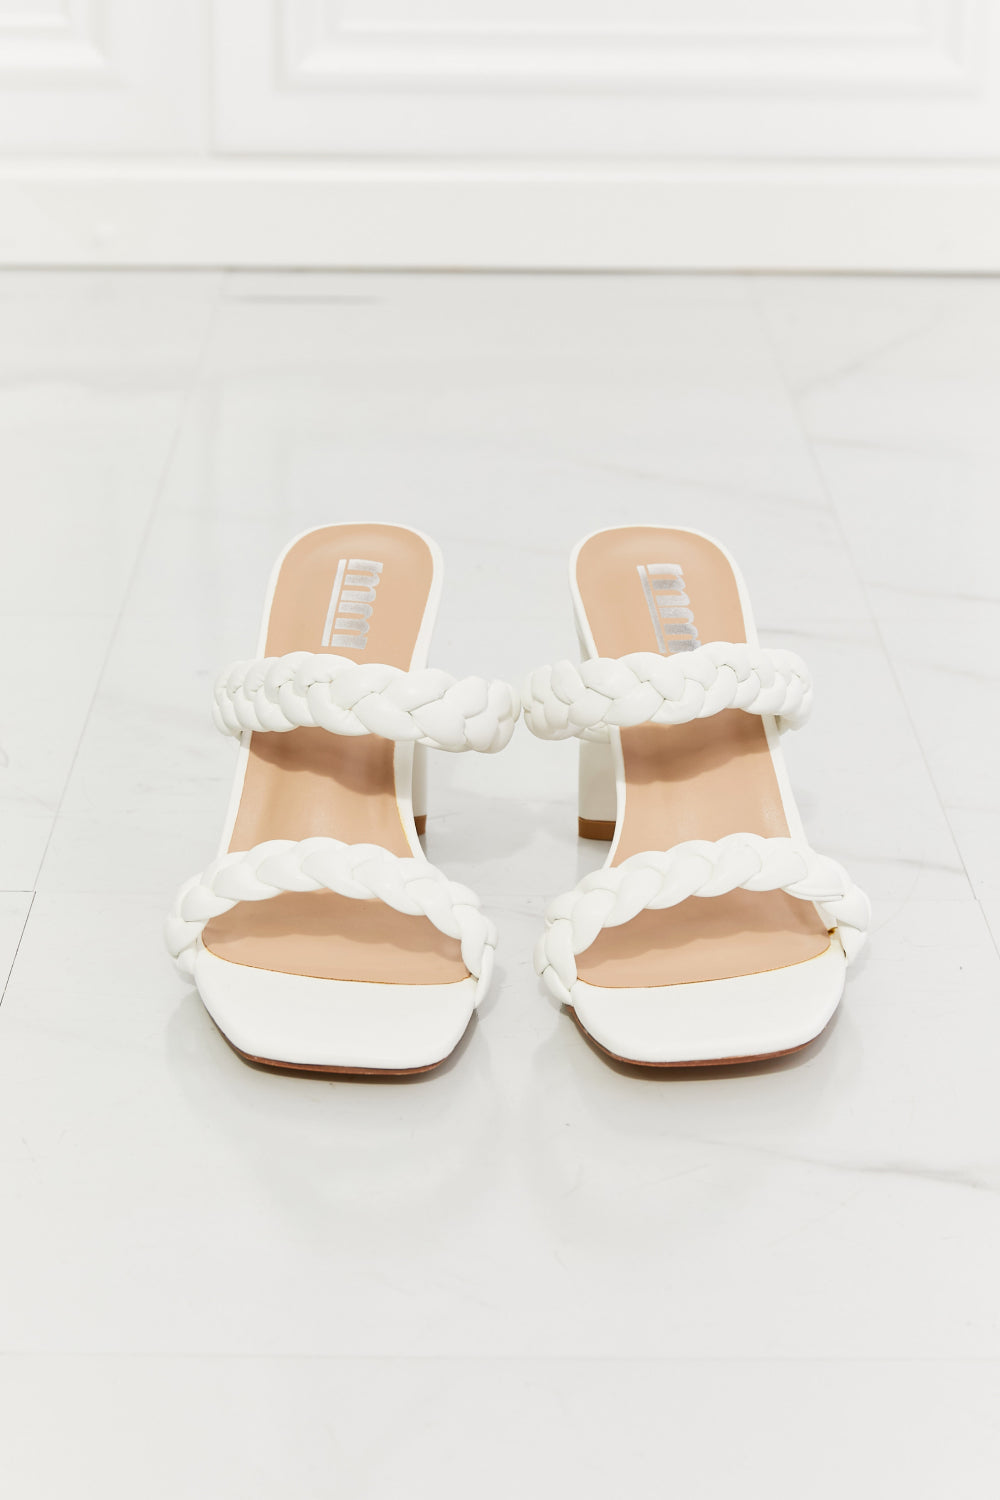 MMShoes In Love Double Braided Block Heel Sandal in White - The Fashion Unicorn